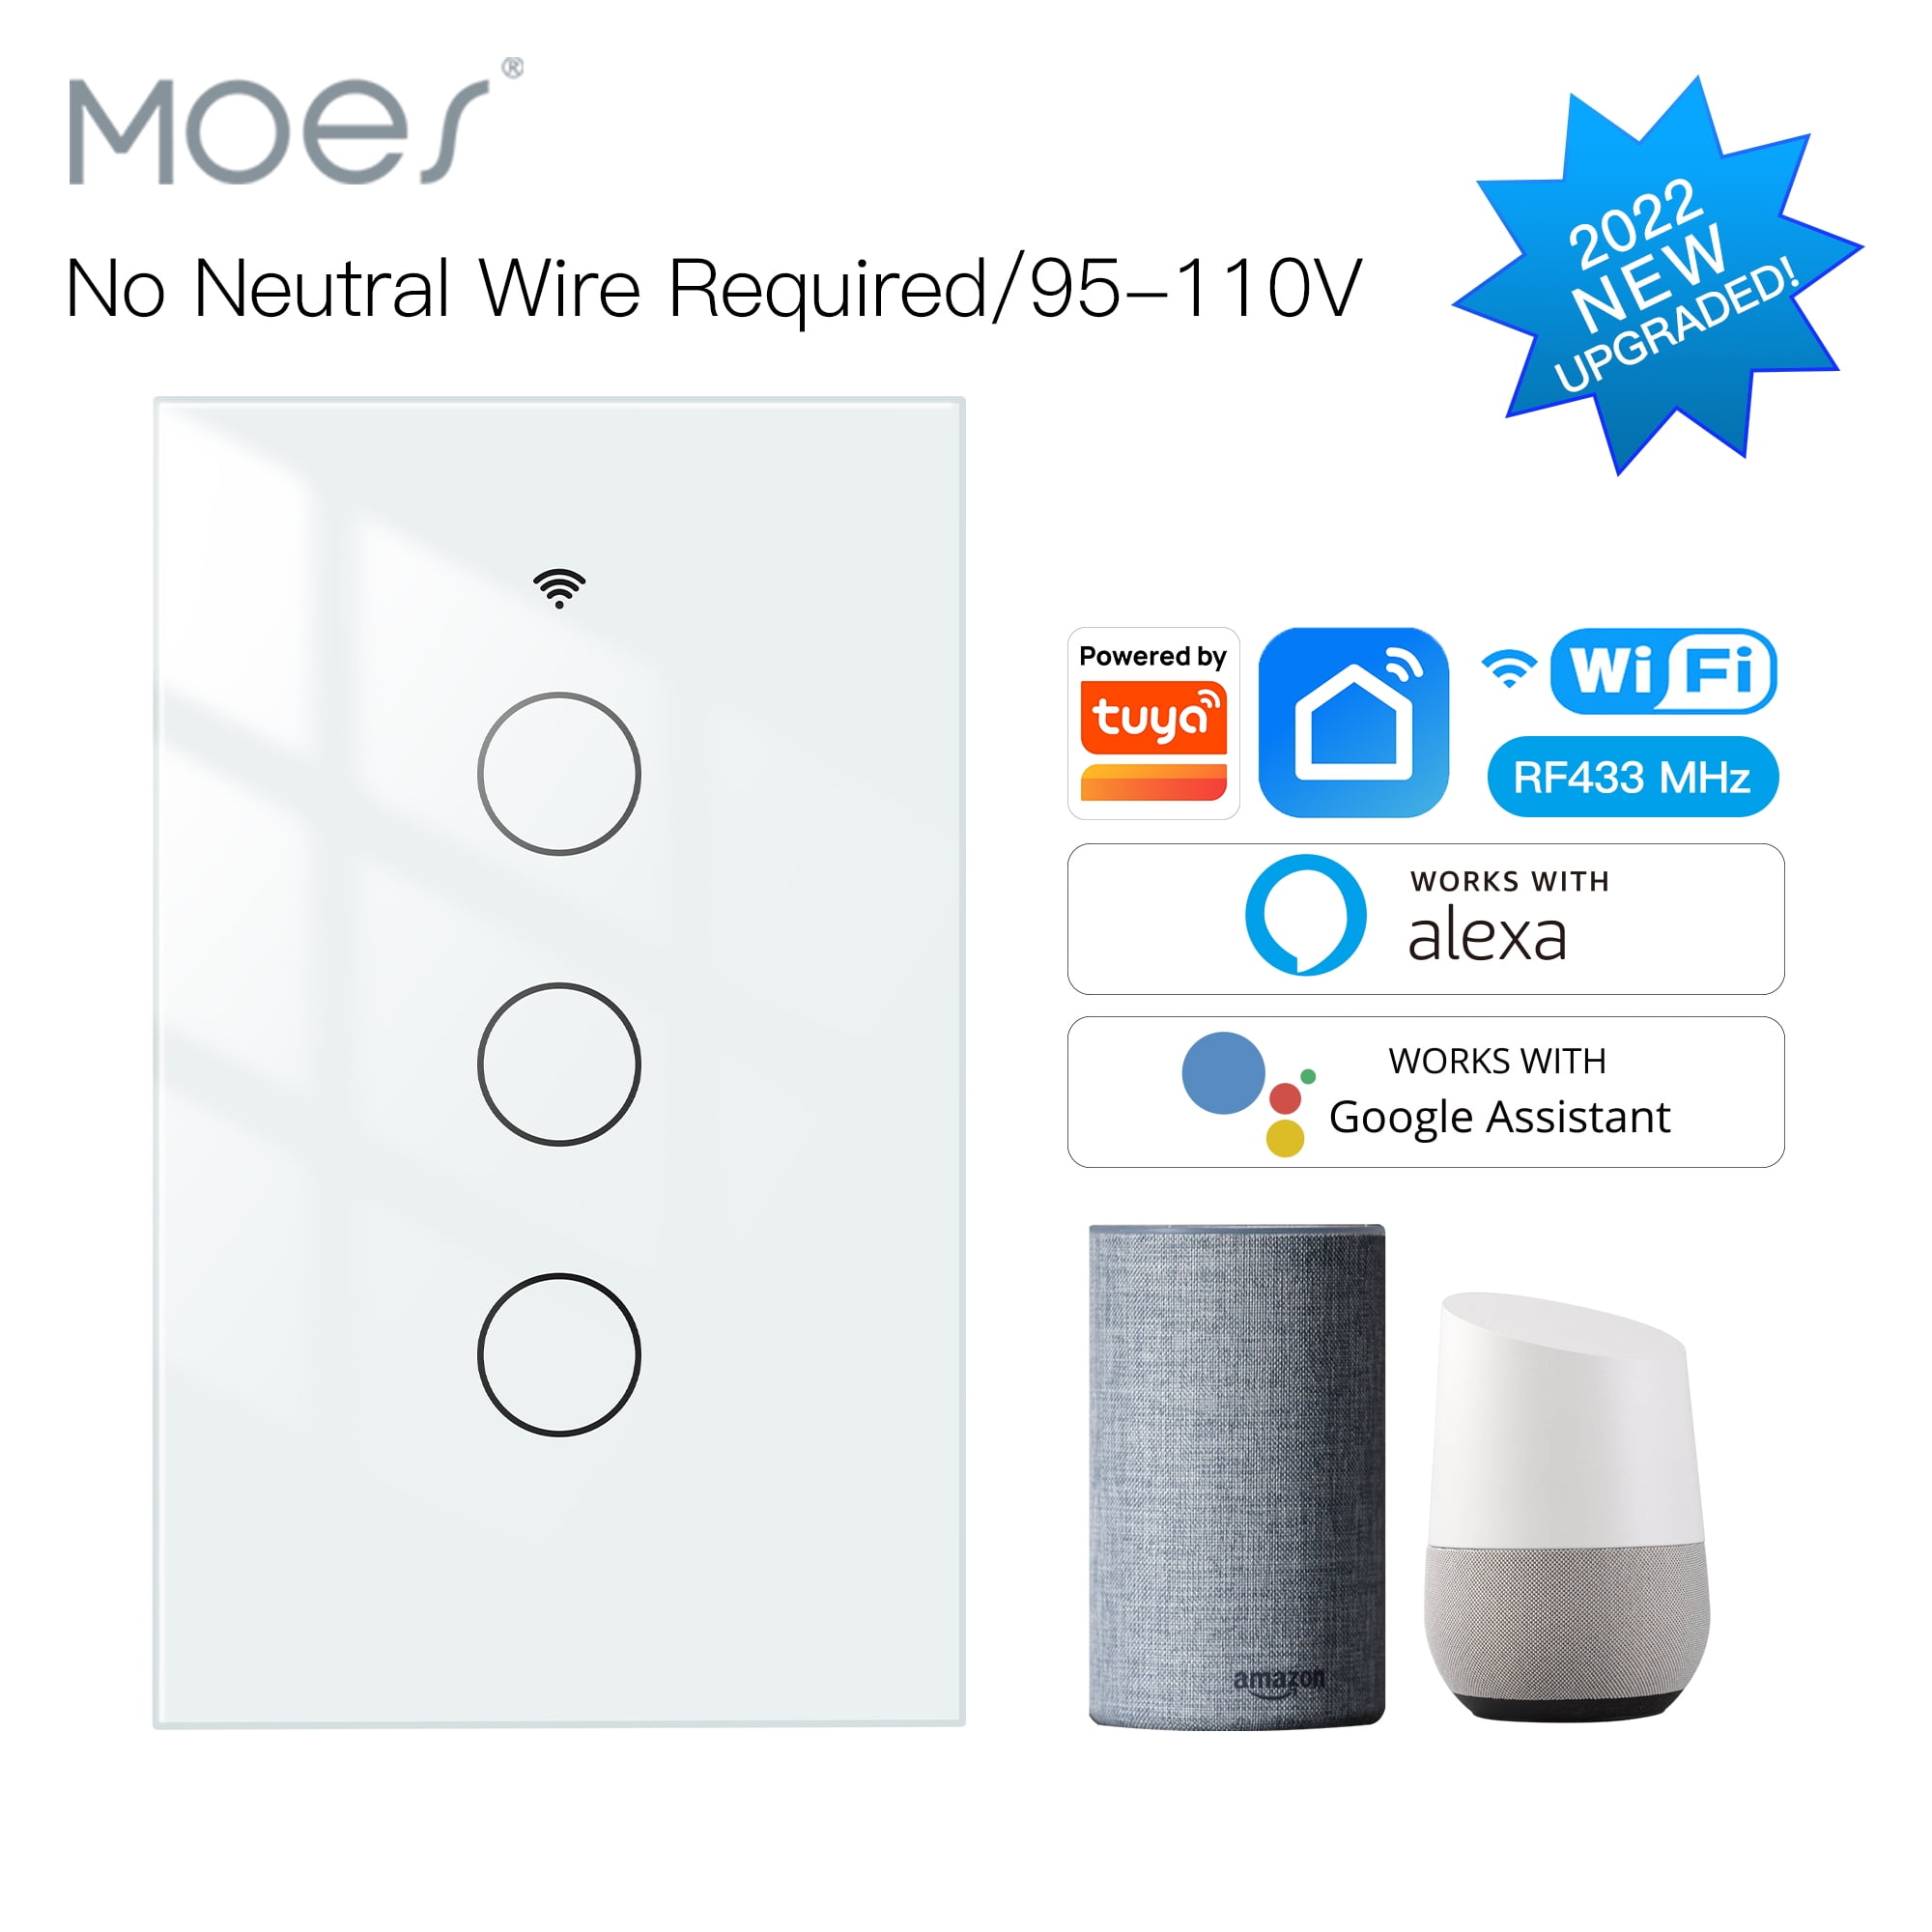 Single Pole 110V 2.4GHz WiFi RF433 Light Switch Works with Smart Life/Tuya App Alexa and Google Home MOES Touch Wall Single Live Wire Smart Switch，No Neutral Wire Needed White 3 Gang 